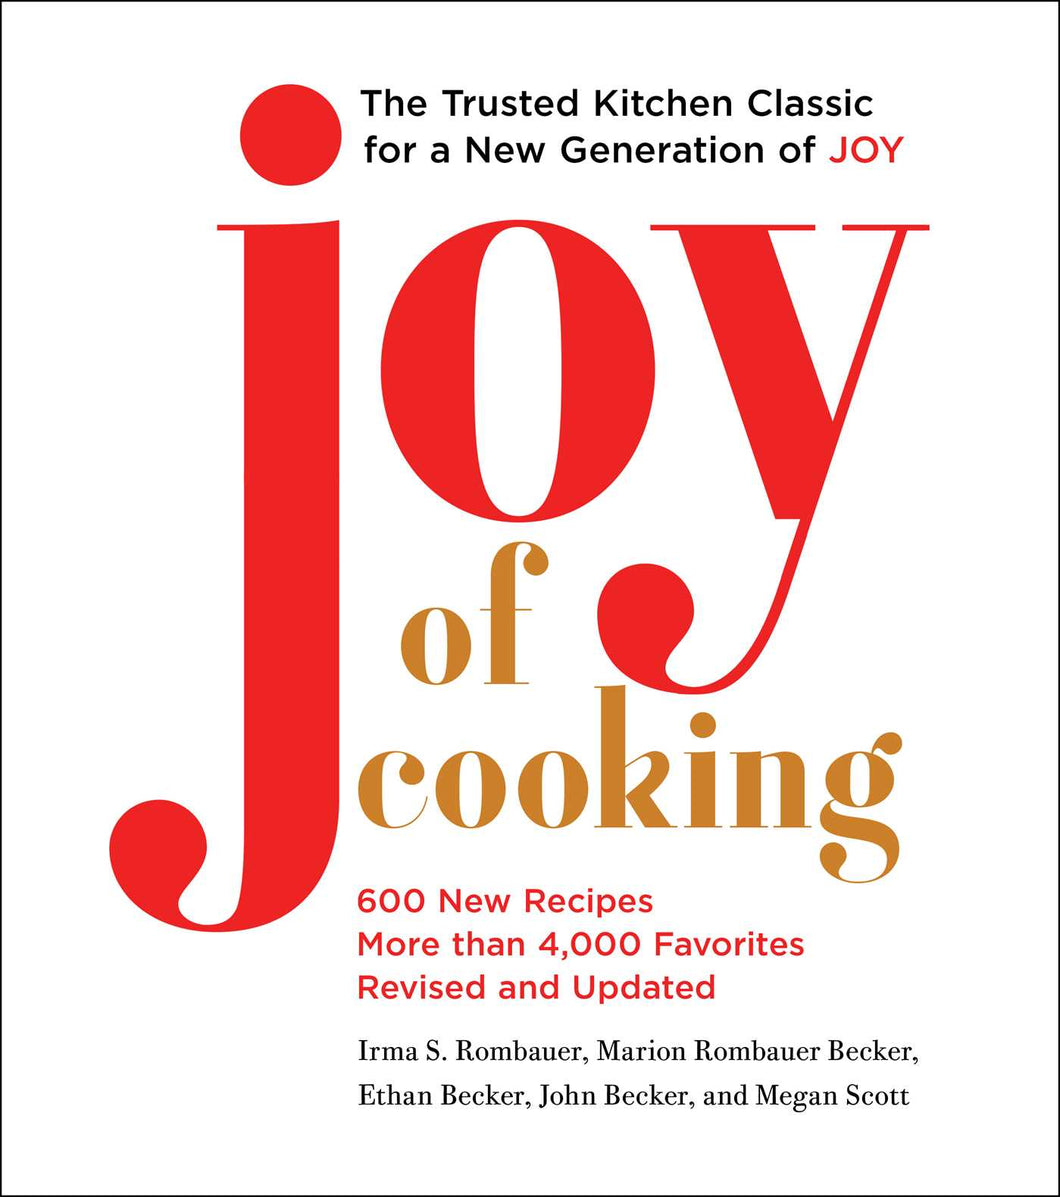 Joy of Cooking (2019) 6000 New Recipes More Than 4000 Favorites Revised and Updated by Irma S. Rombauer